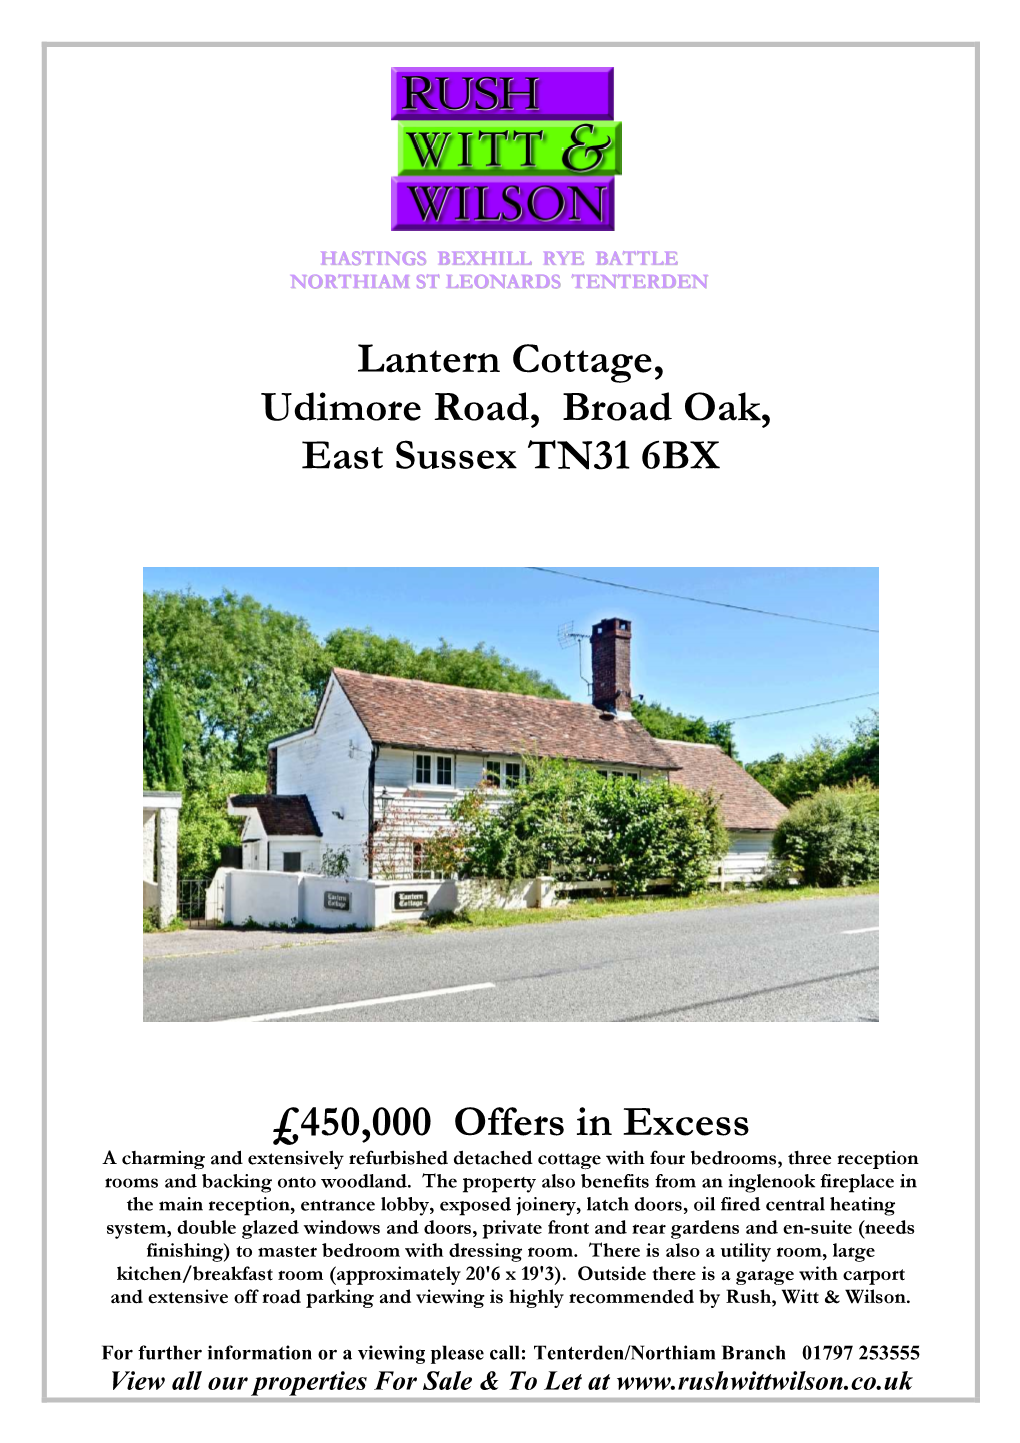 Lantern Cottage, Udimore Road, Broad Oak, East Sussex TN31 6BX £450,000 Offers in Excess